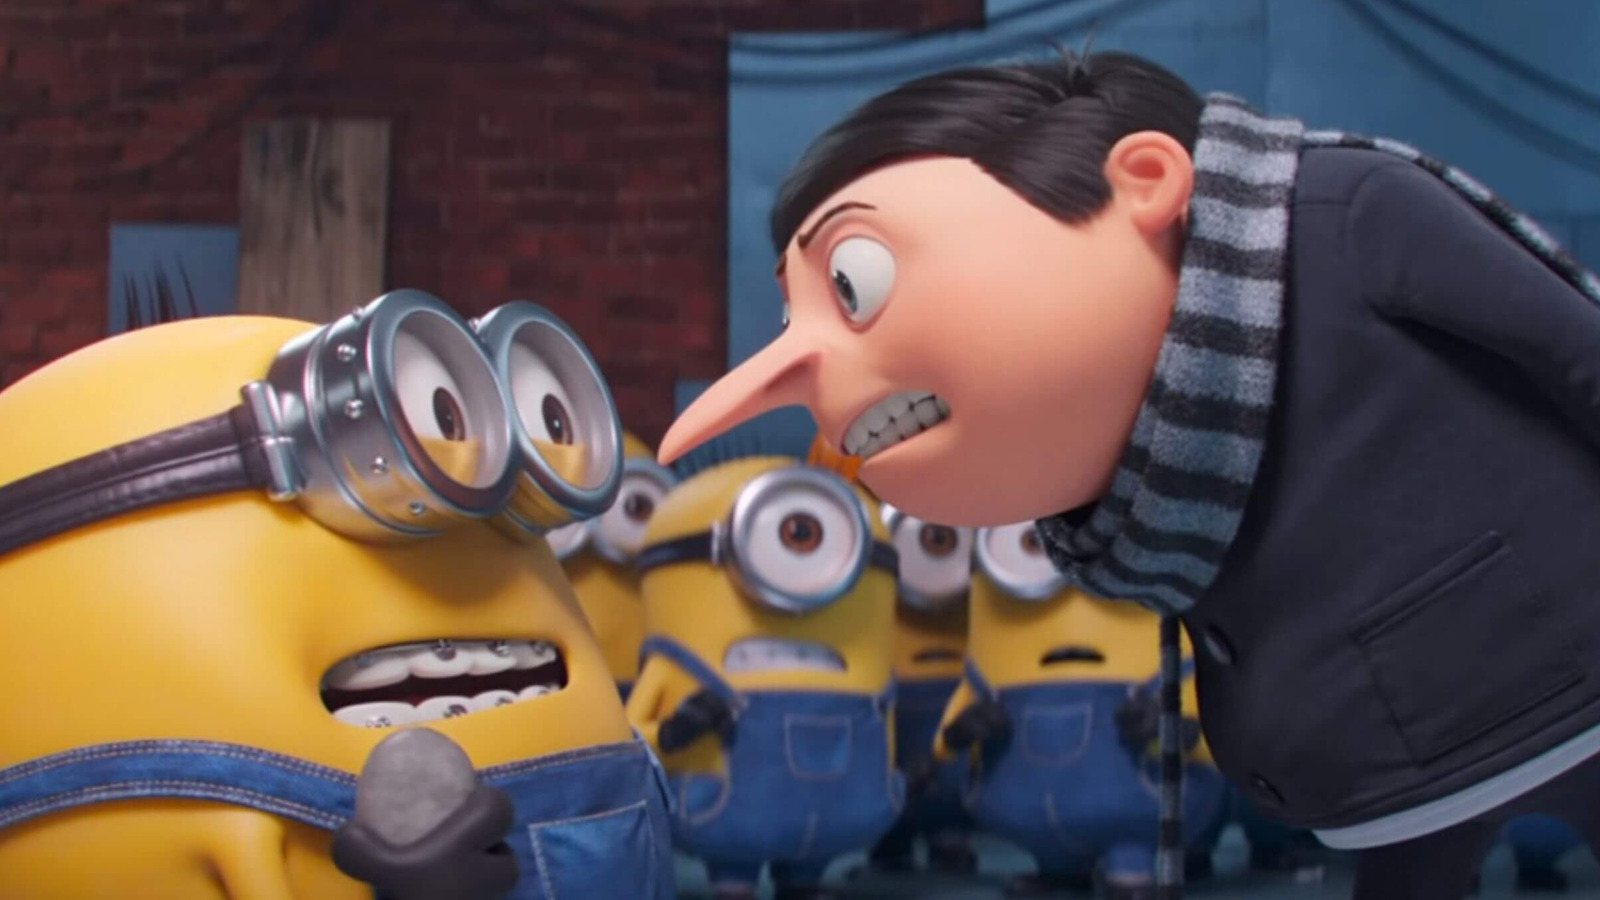 Why are people watching Minions in suits? The Rise of Gru meme